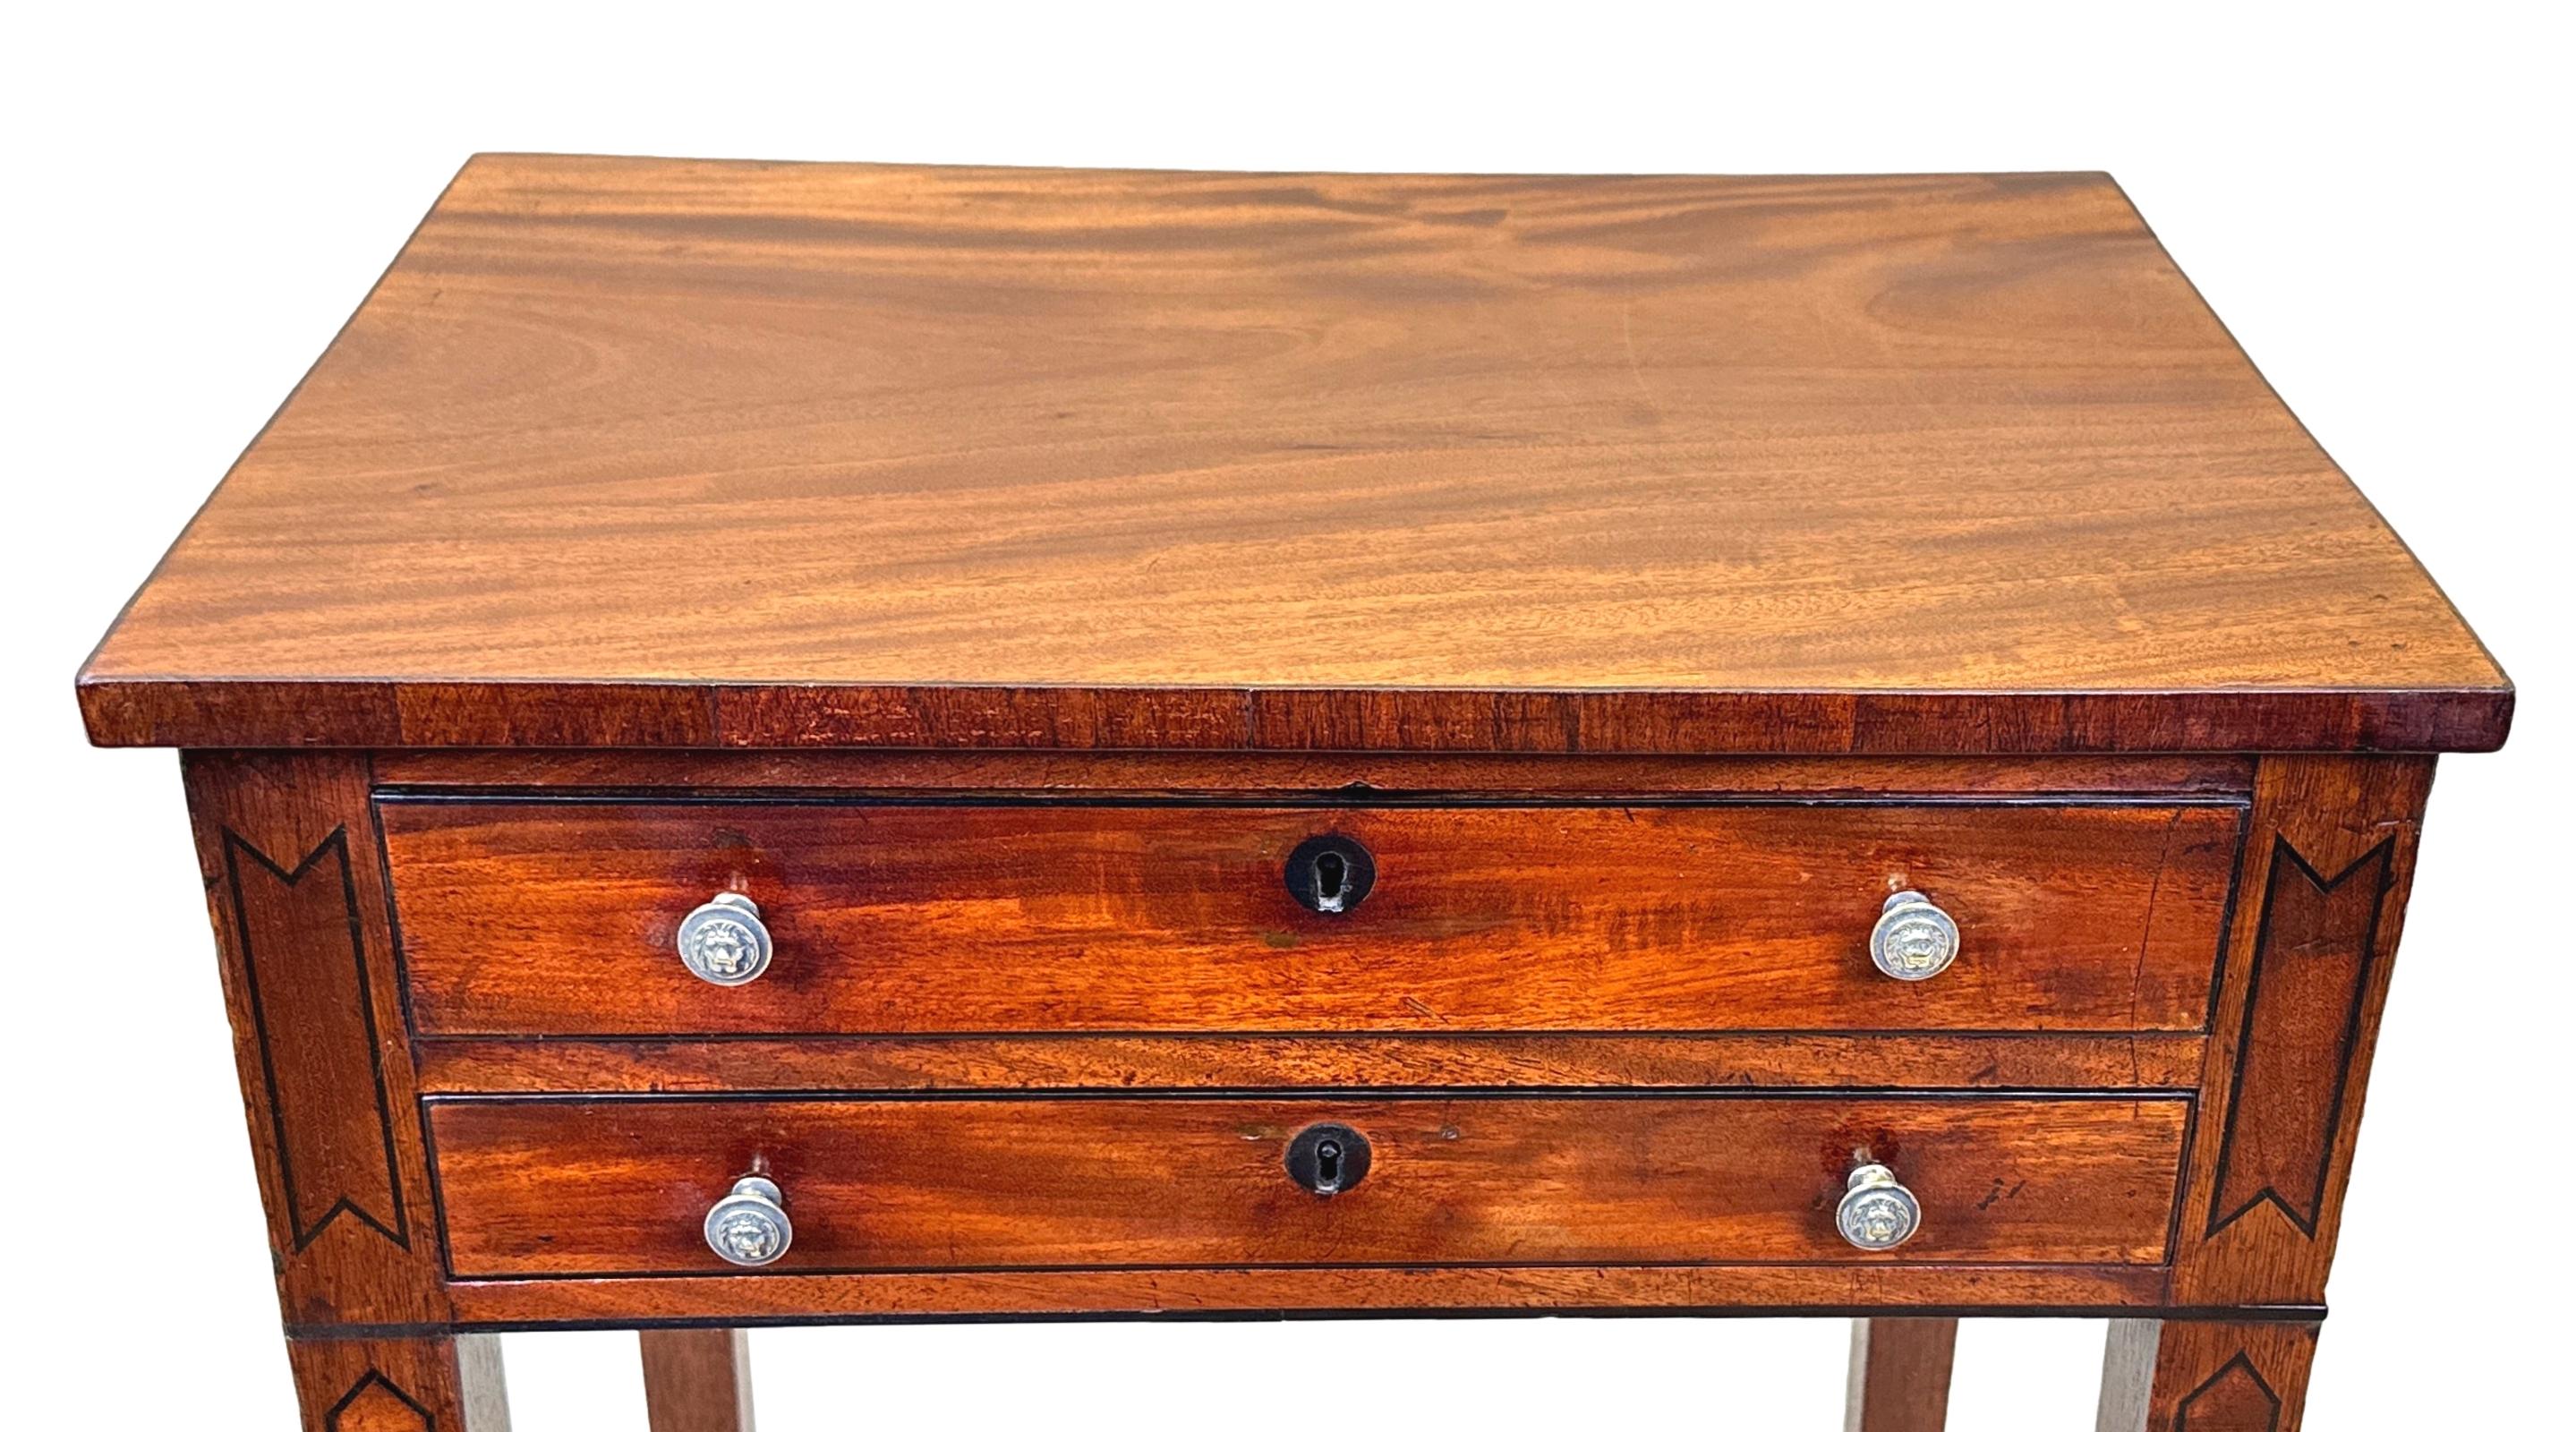 A Good Quality Late 18th Century, George III Period, Mahogany Rectangular Occasional Lamp Table, Having Well Figured Top Over Two Shallow Drawers With Replacement Brass Knobs And Attractive Ebonised Strung Decoration Throughout, Raised On Elegant